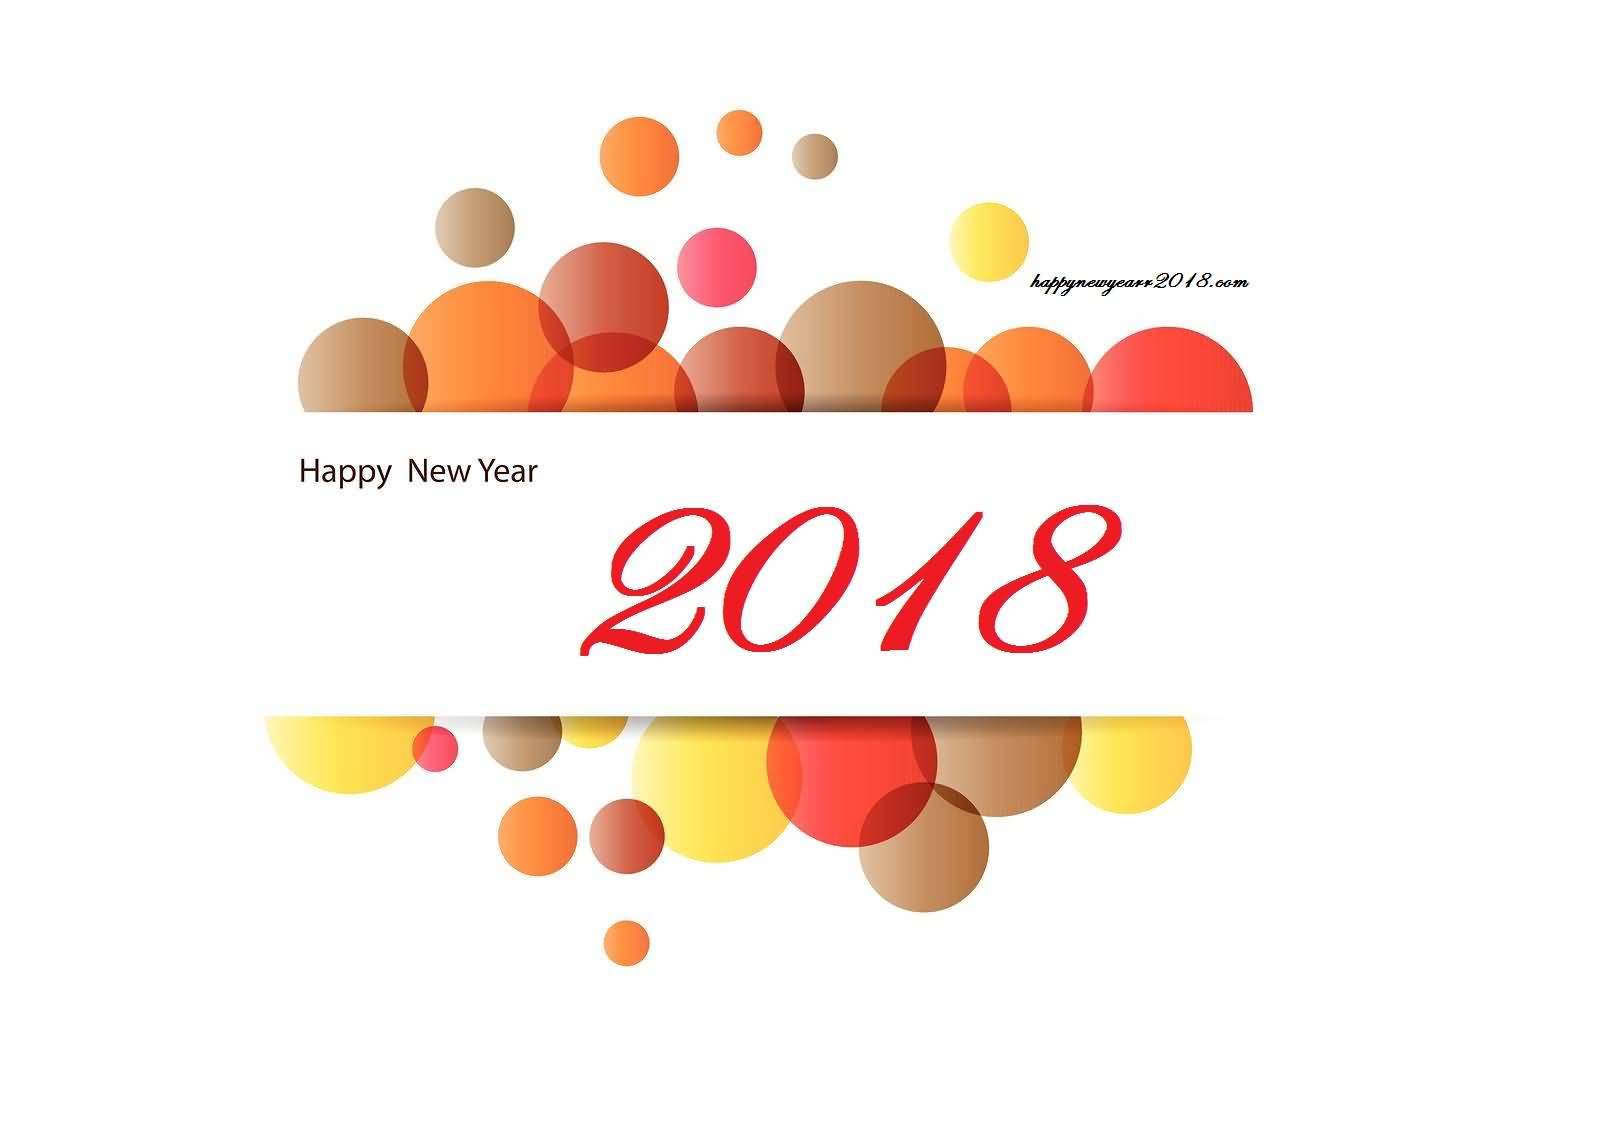 New Year 2018 Cards Wishes Image Picture Photo Wallpaper Greetings 11